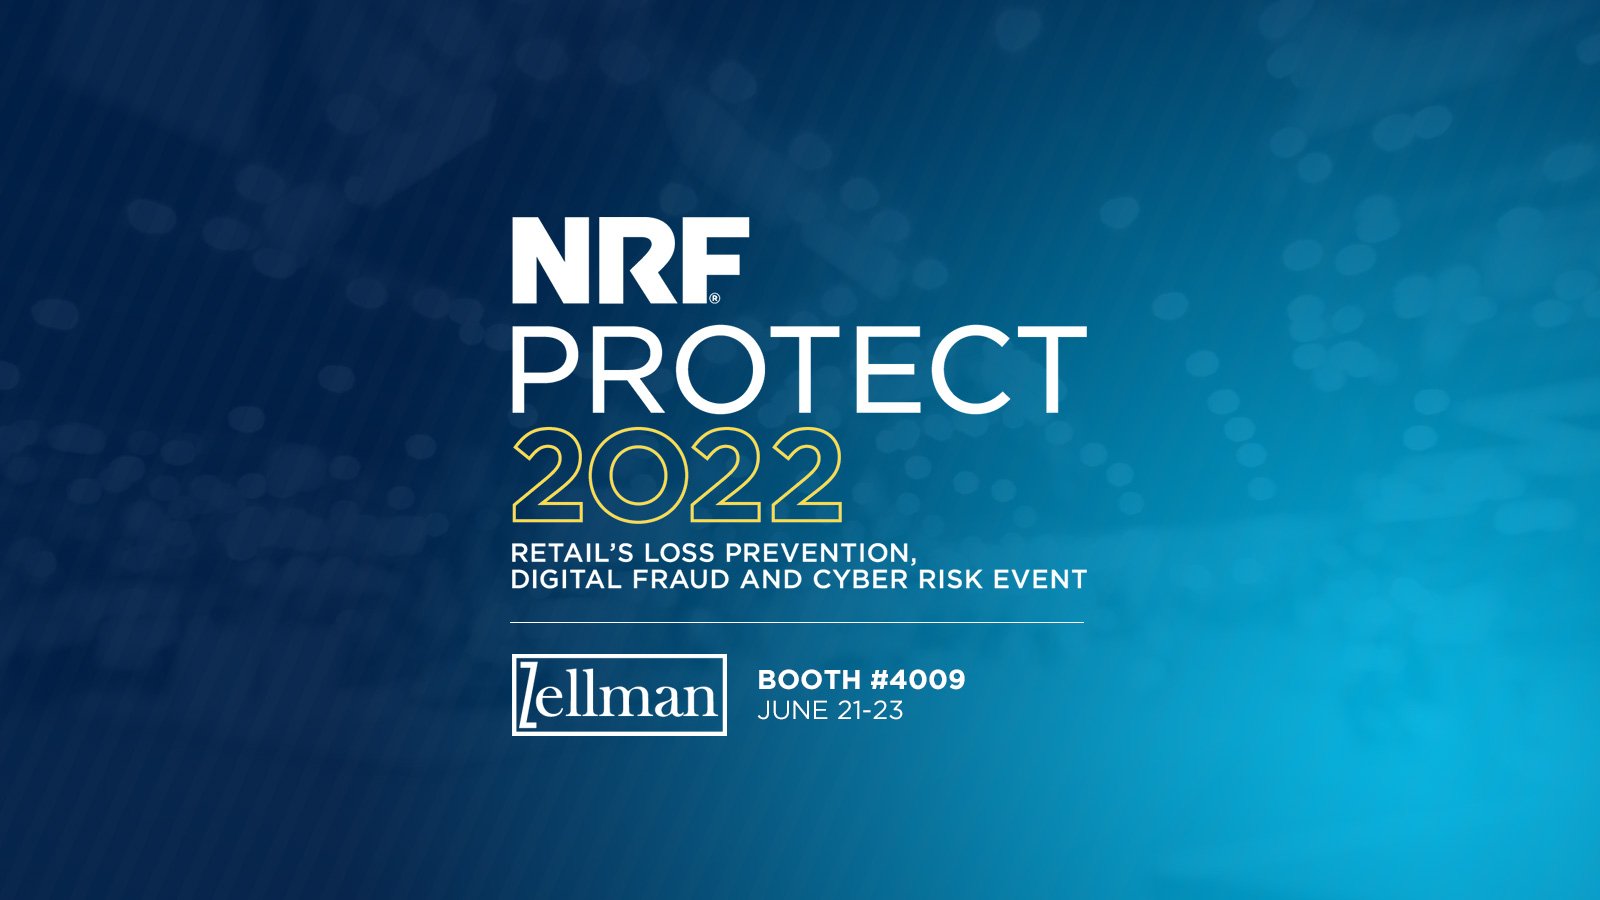 Supporting The Loss Prevention Benevolent Fund And Meeting An MLB Legend: The Zellman Group At NRF PROTECT 2022